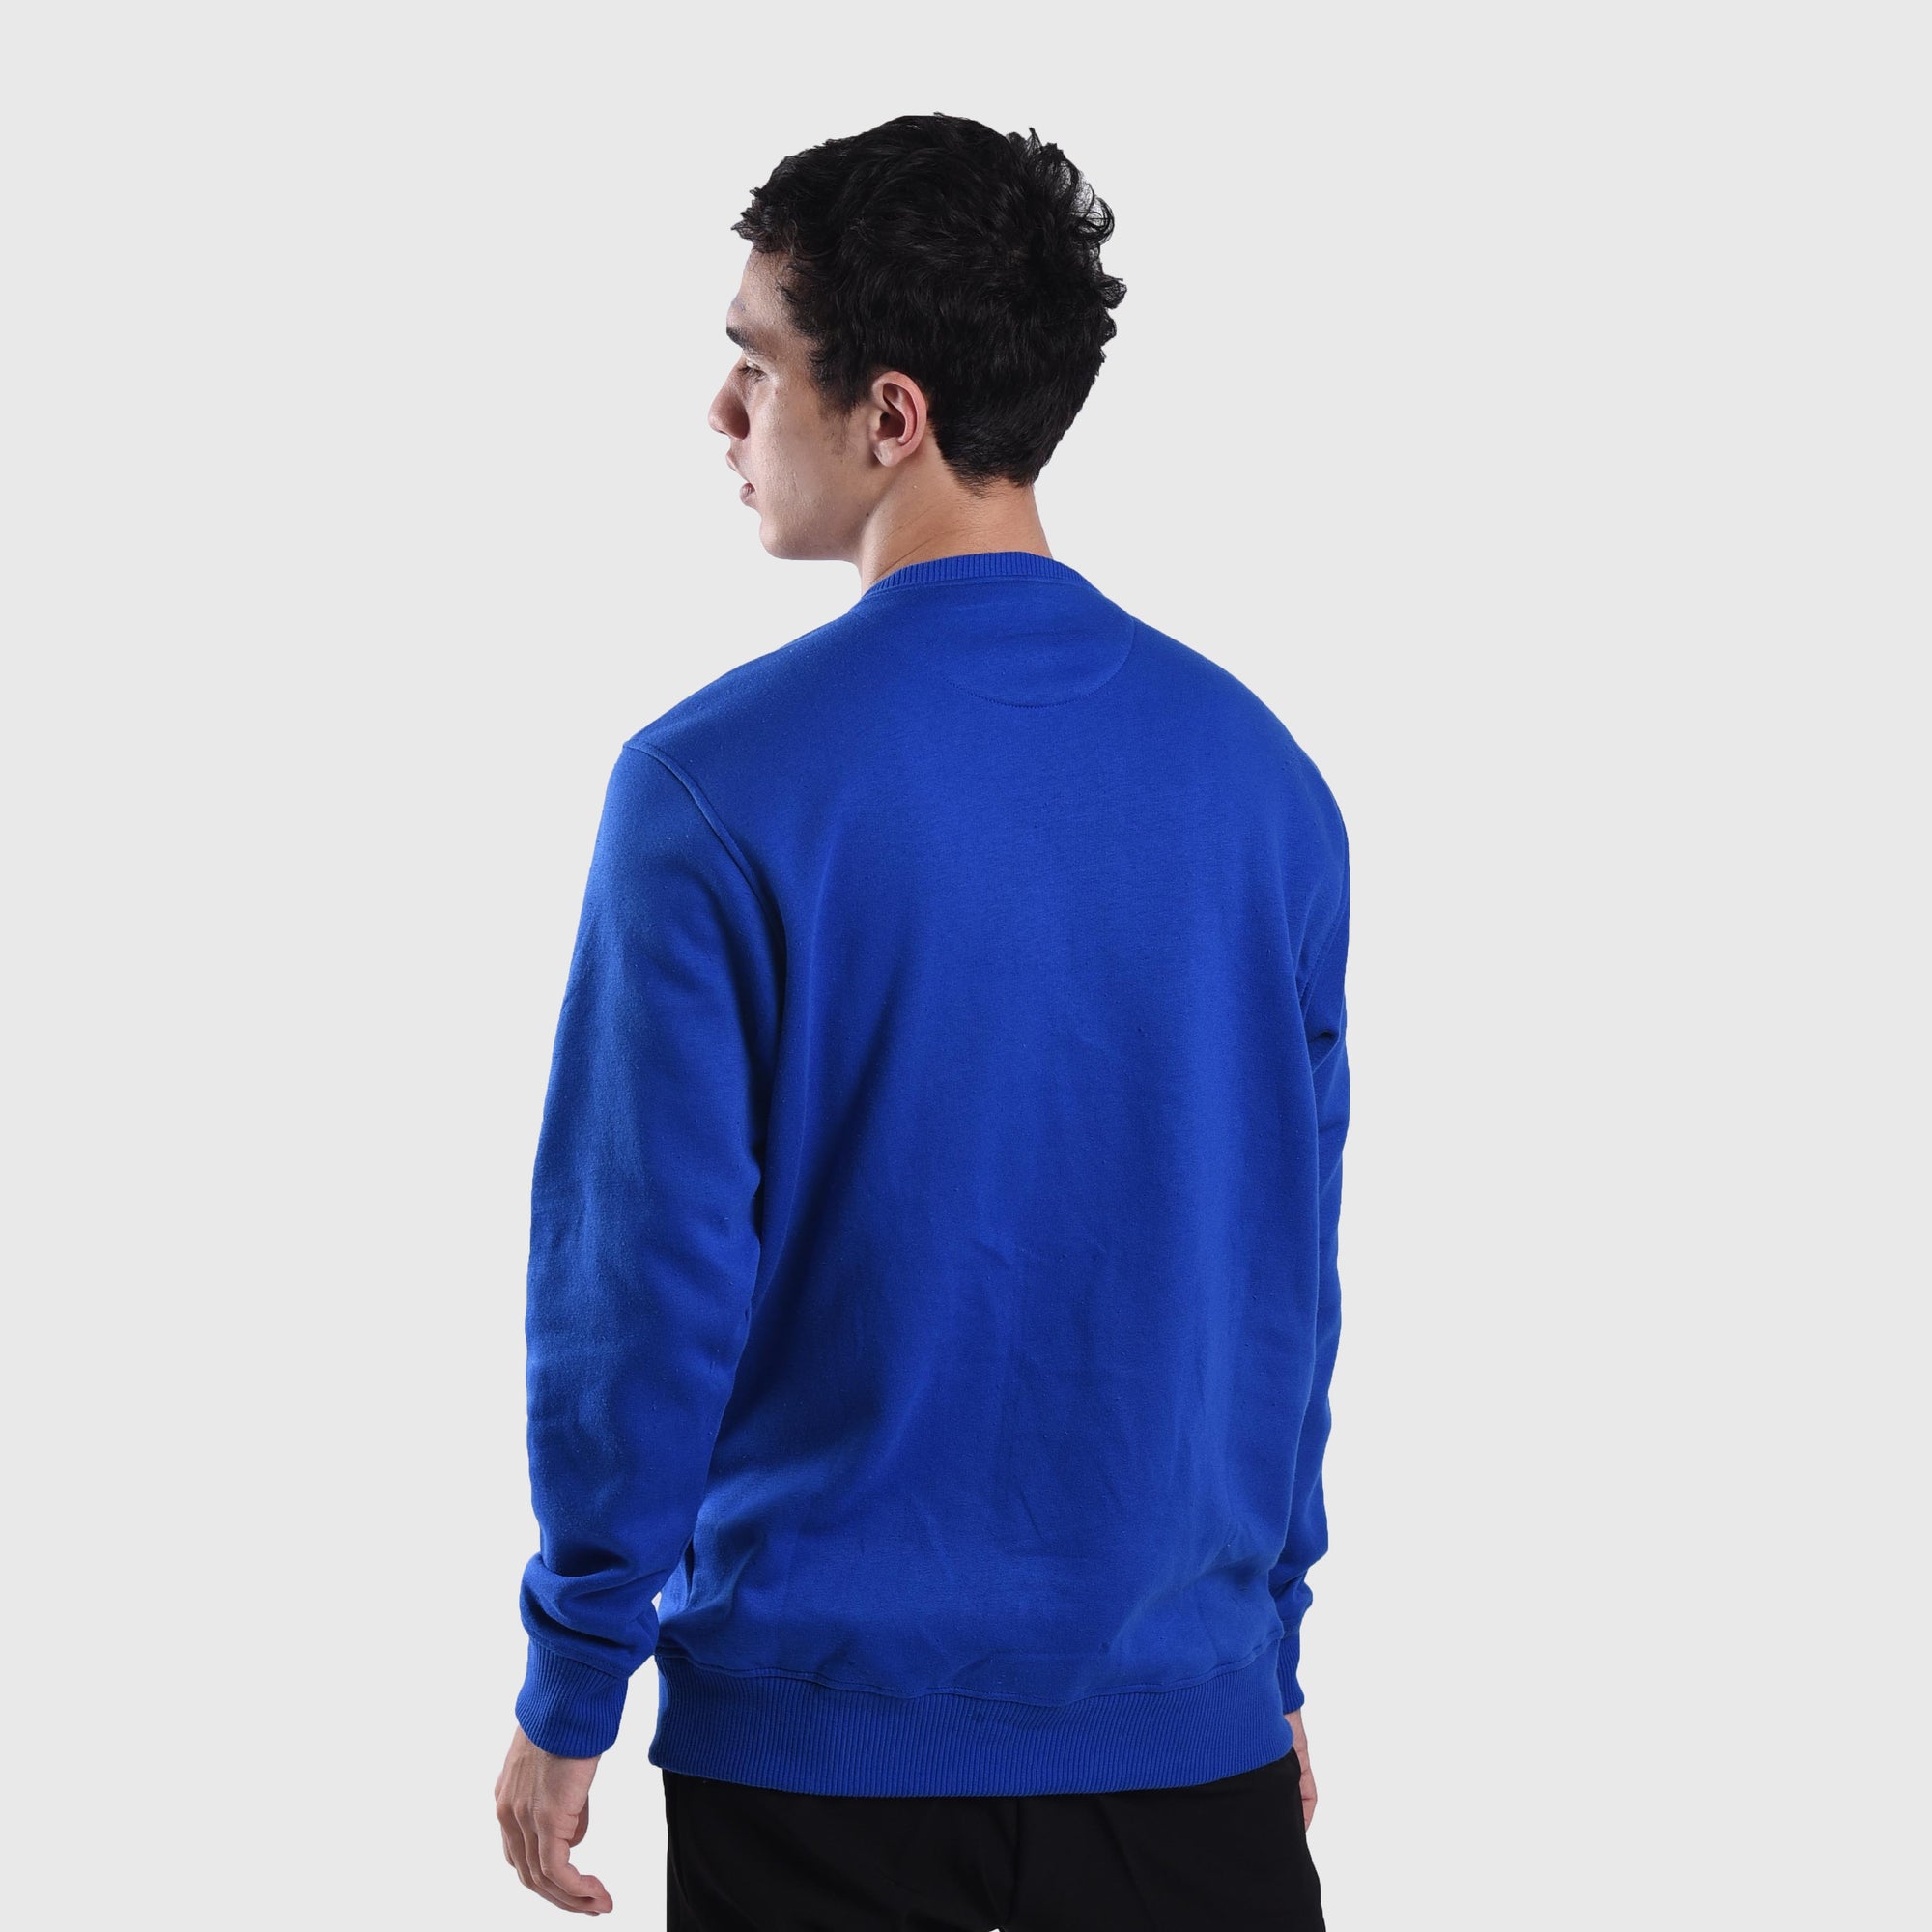 SS520 Oxford Blue Friday Blessing Crewneck